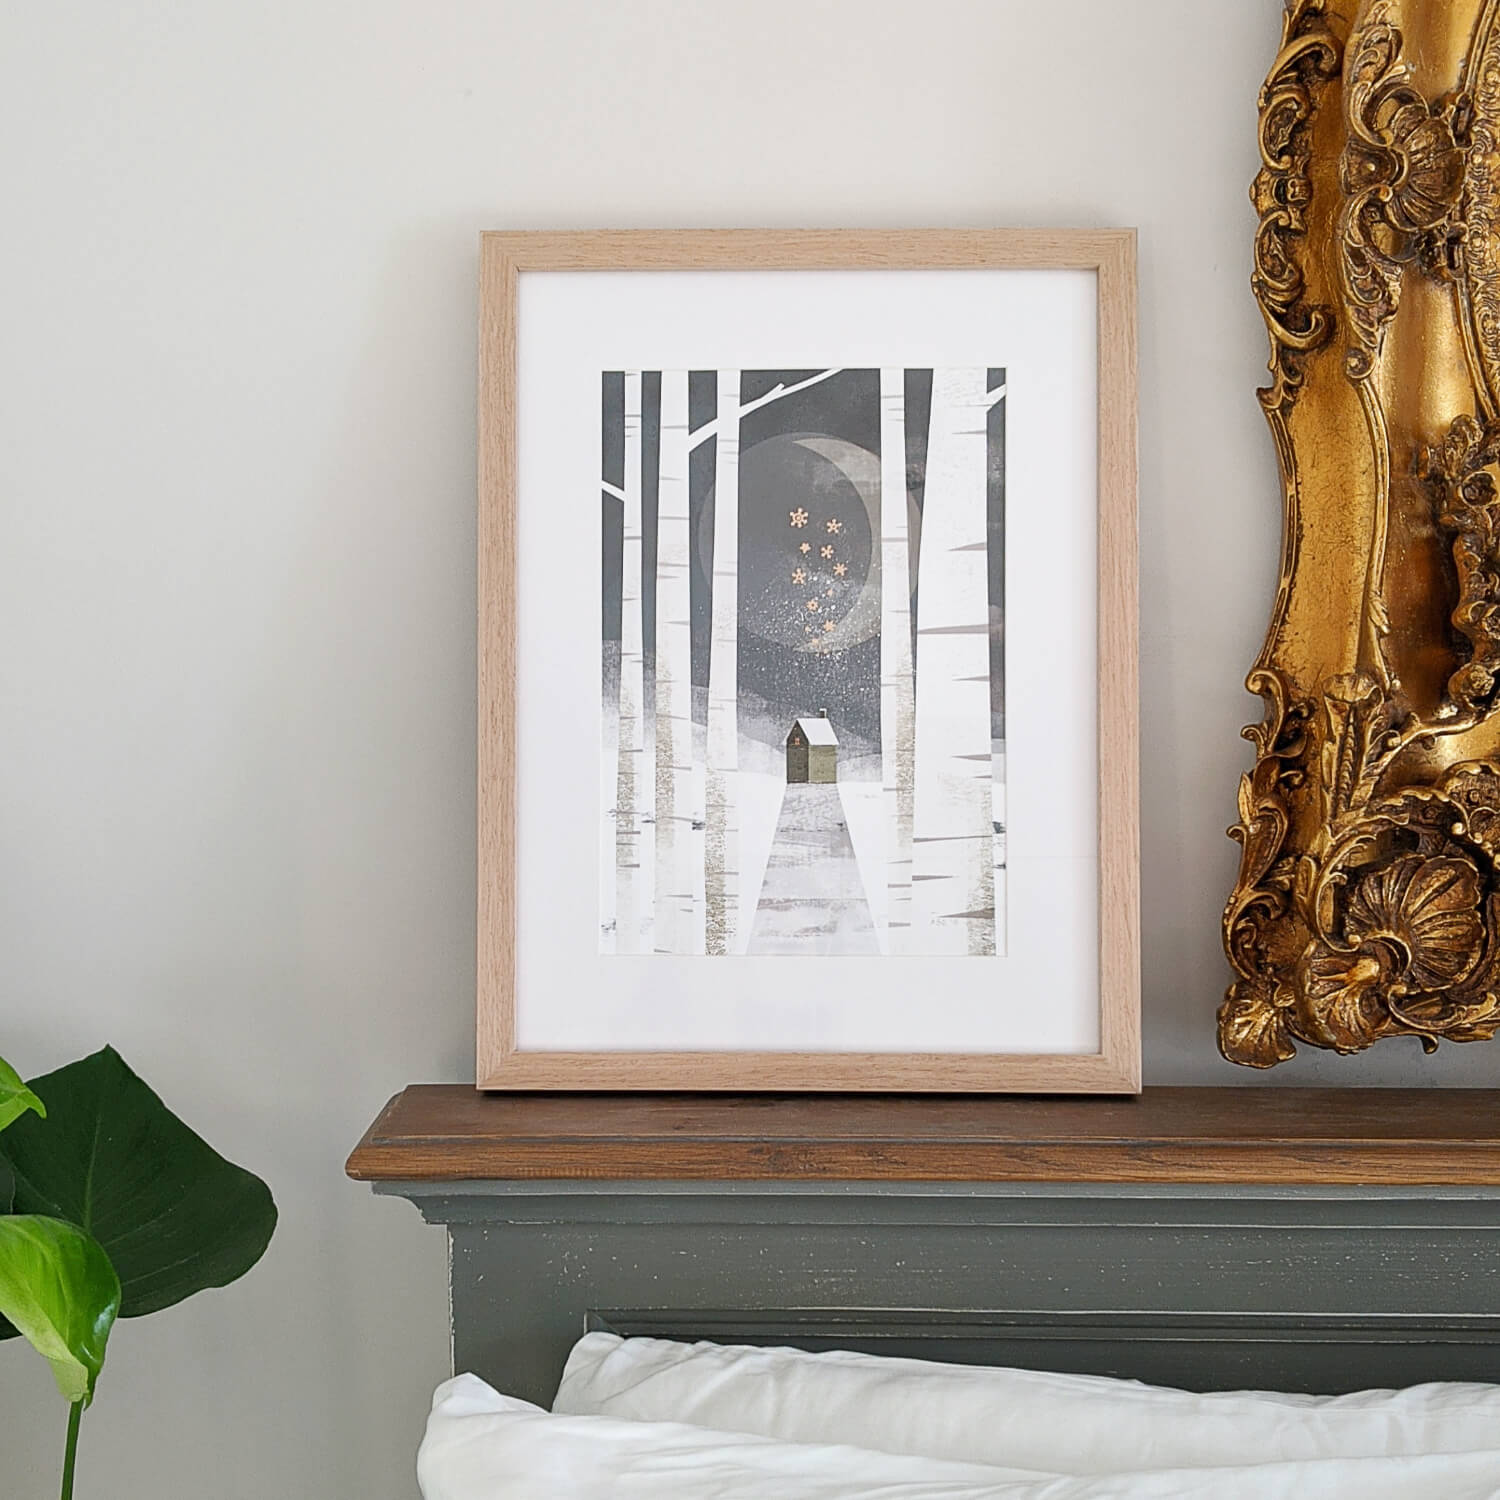 House Under The Moon Print in Gold Frame Displayed in Bedroom